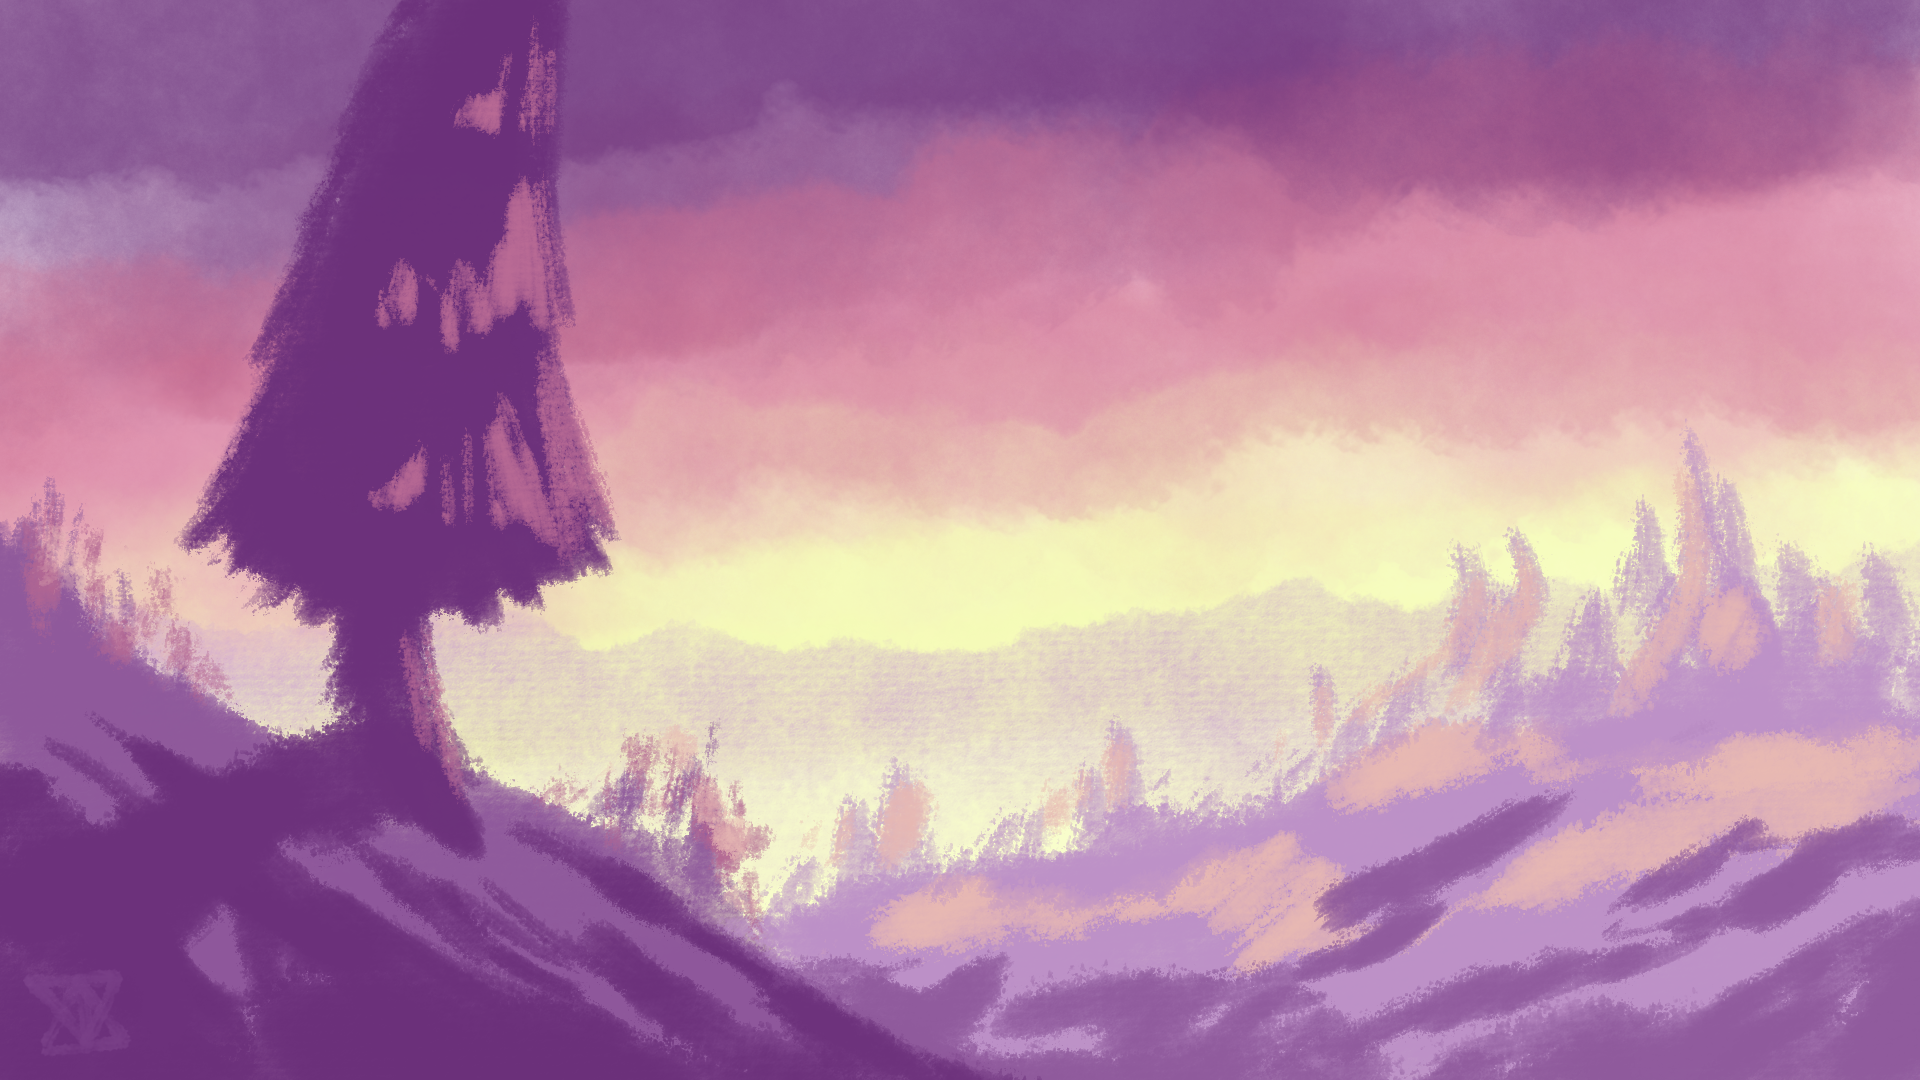 A digital painting depicting a hilly landscape with conifers, in a restricted palette of purple, pinkish orange, and yellow.